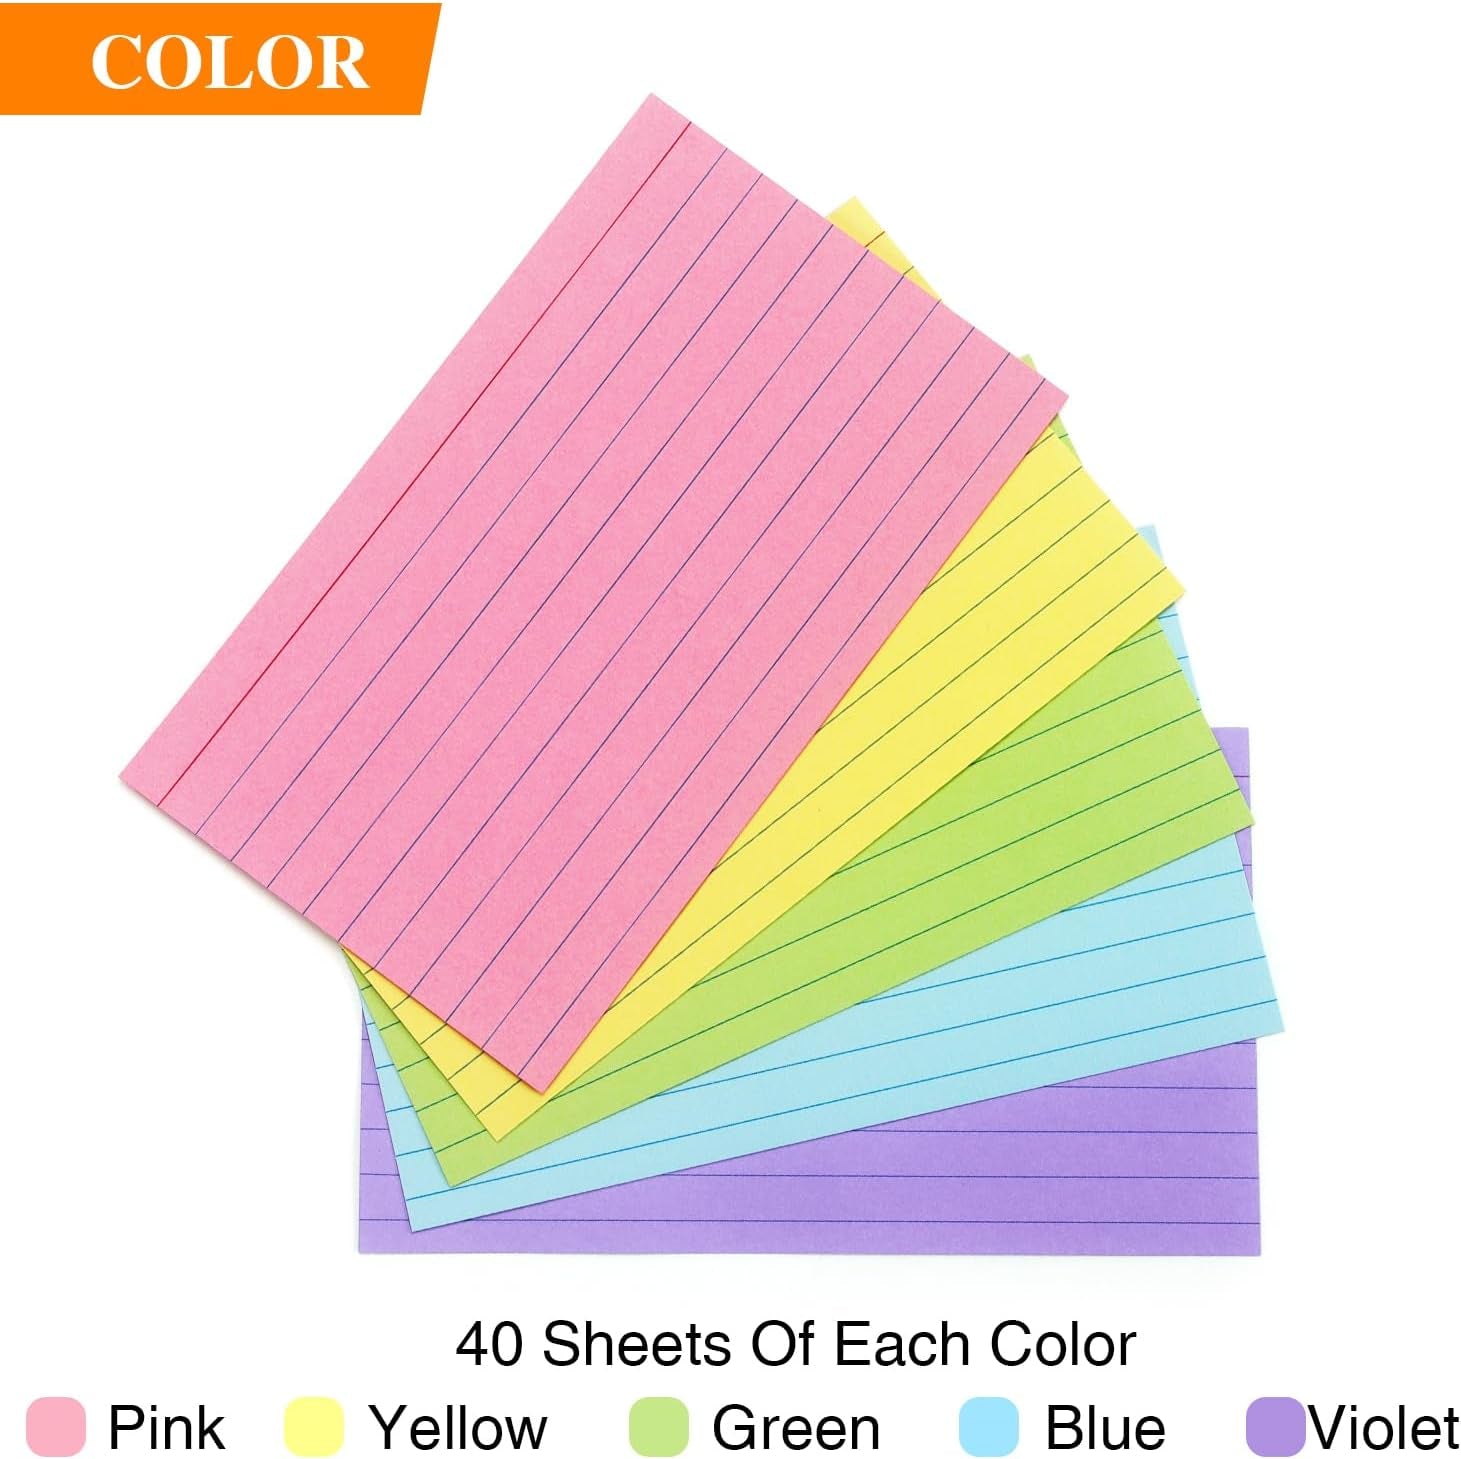 Ruled Index Cards Pastel Colored Index Flash Cards Note Cards for School, 200-Count, Home and Office Flashcards, 3 X 5 Inch